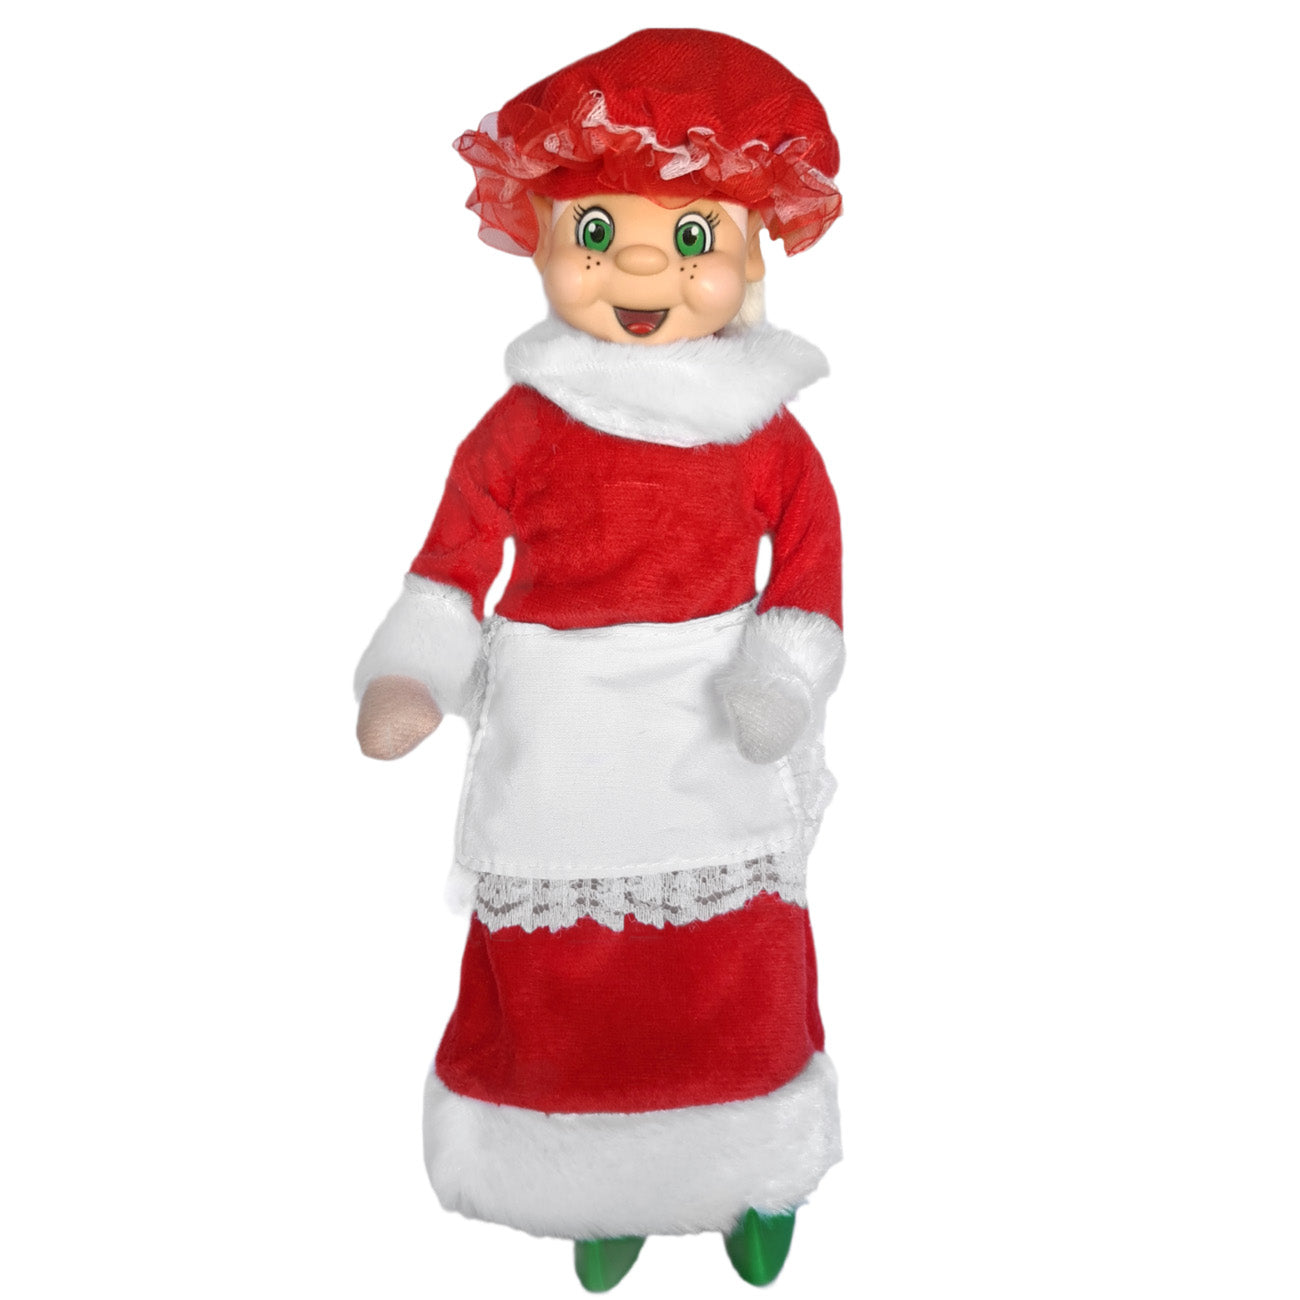 Elf wearing a mrs claus outfit